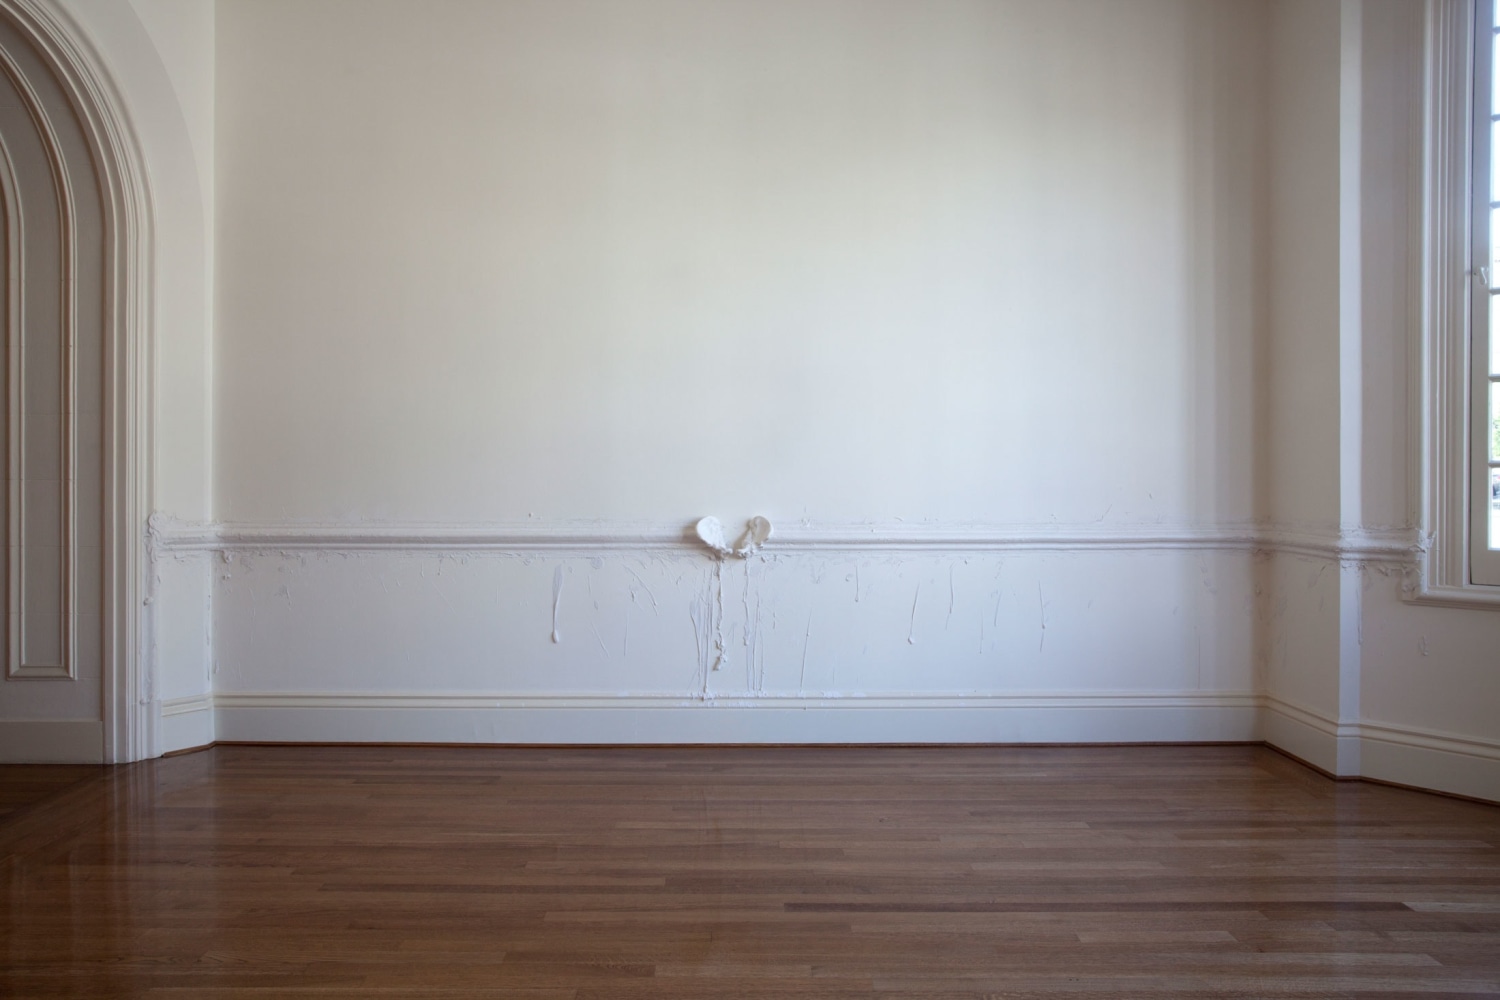 Janine Antoni
Crowned, 2013
Plaster molding with plaster pelvic bones
Dimensions variable, site-transferrable installation
Edition of 5 and 1 artist&amp;#39;s proof&amp;nbsp;
Installation view Anthony Meier Fine Arts, San Francisco, 2015